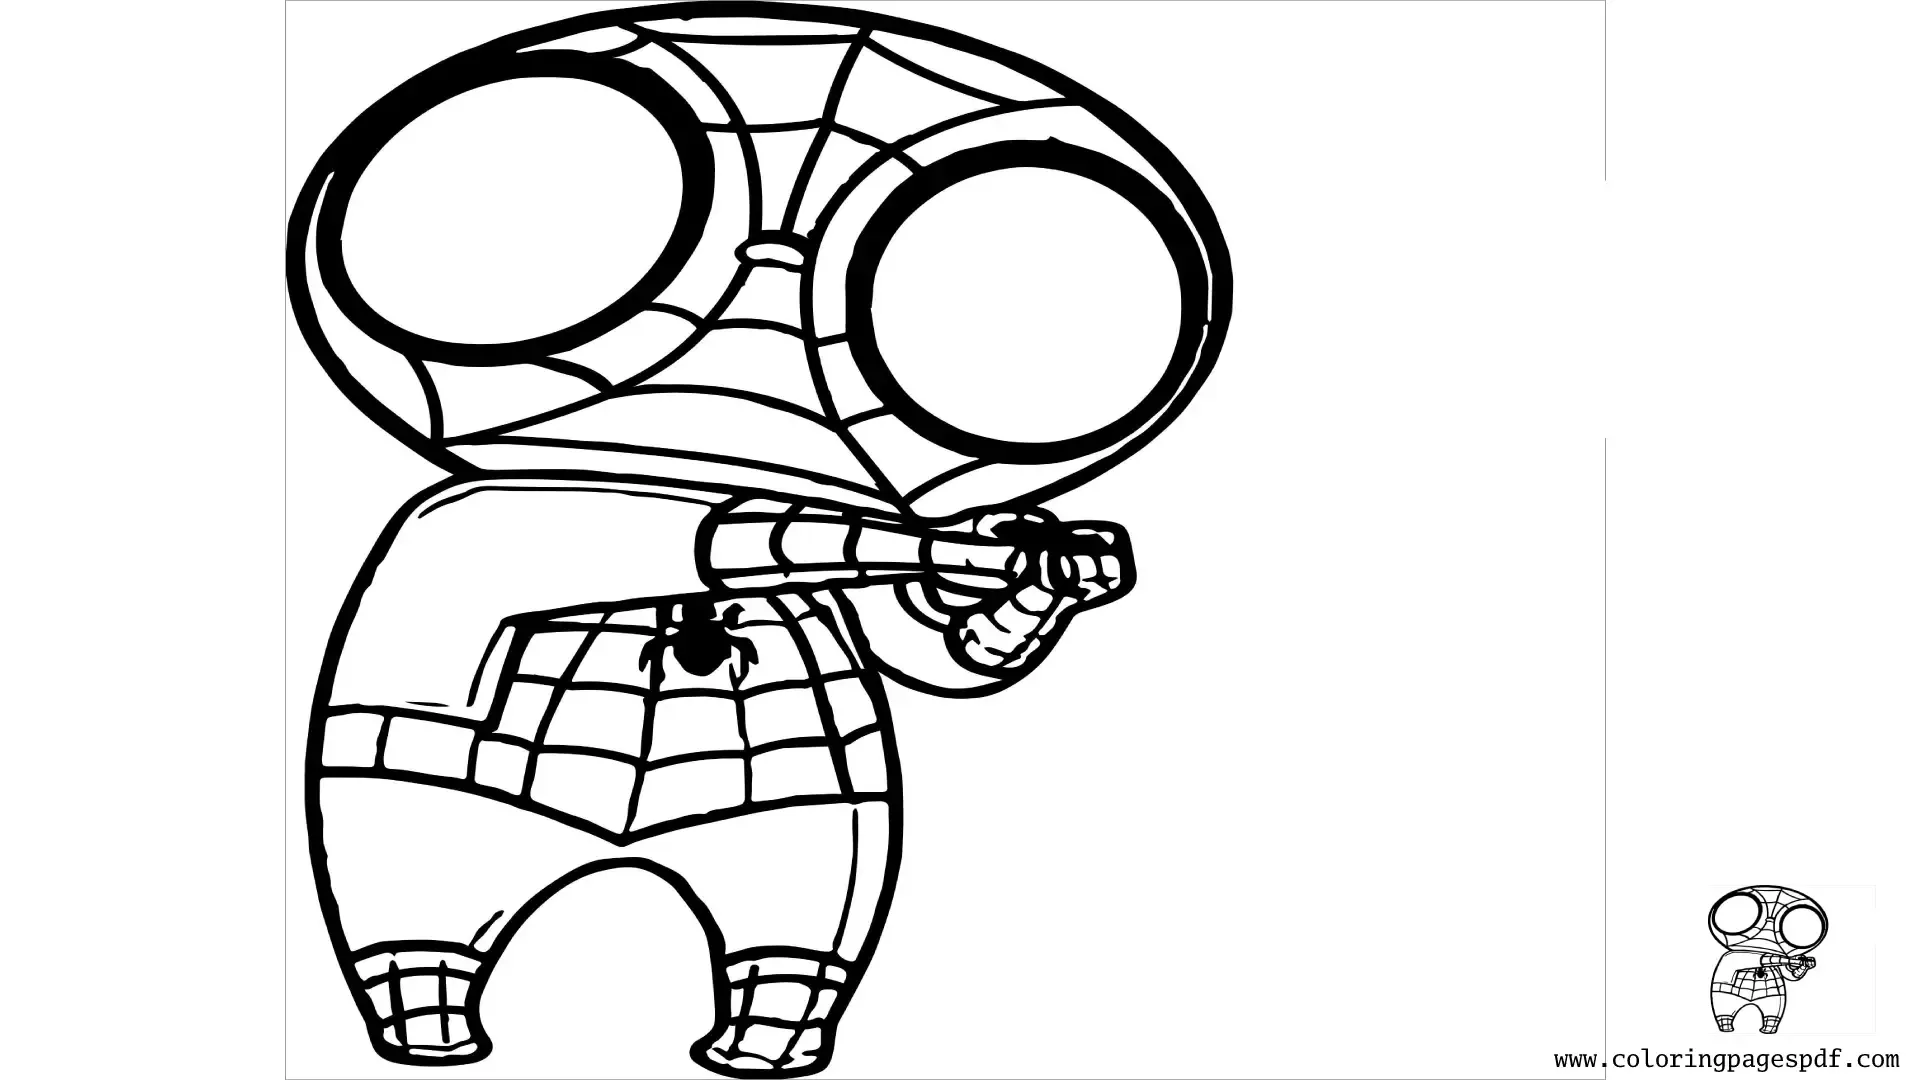 Coloring Page Of Chibi Spiderman